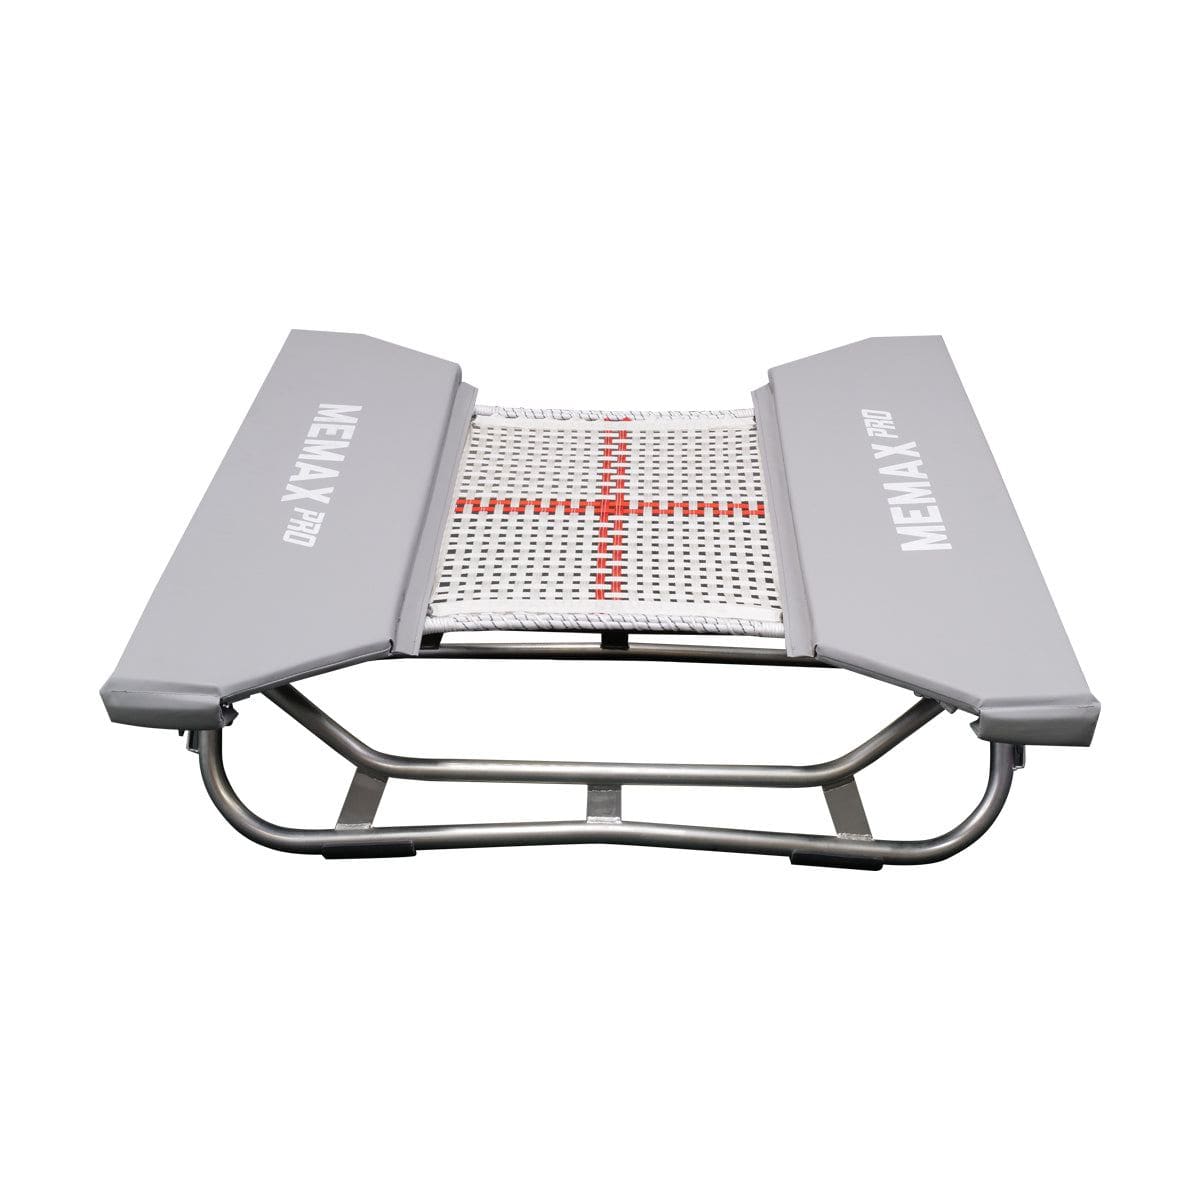 Open-End Incline Trampoline with Safety Mat - 120x120cm - MEMAX Pro Series